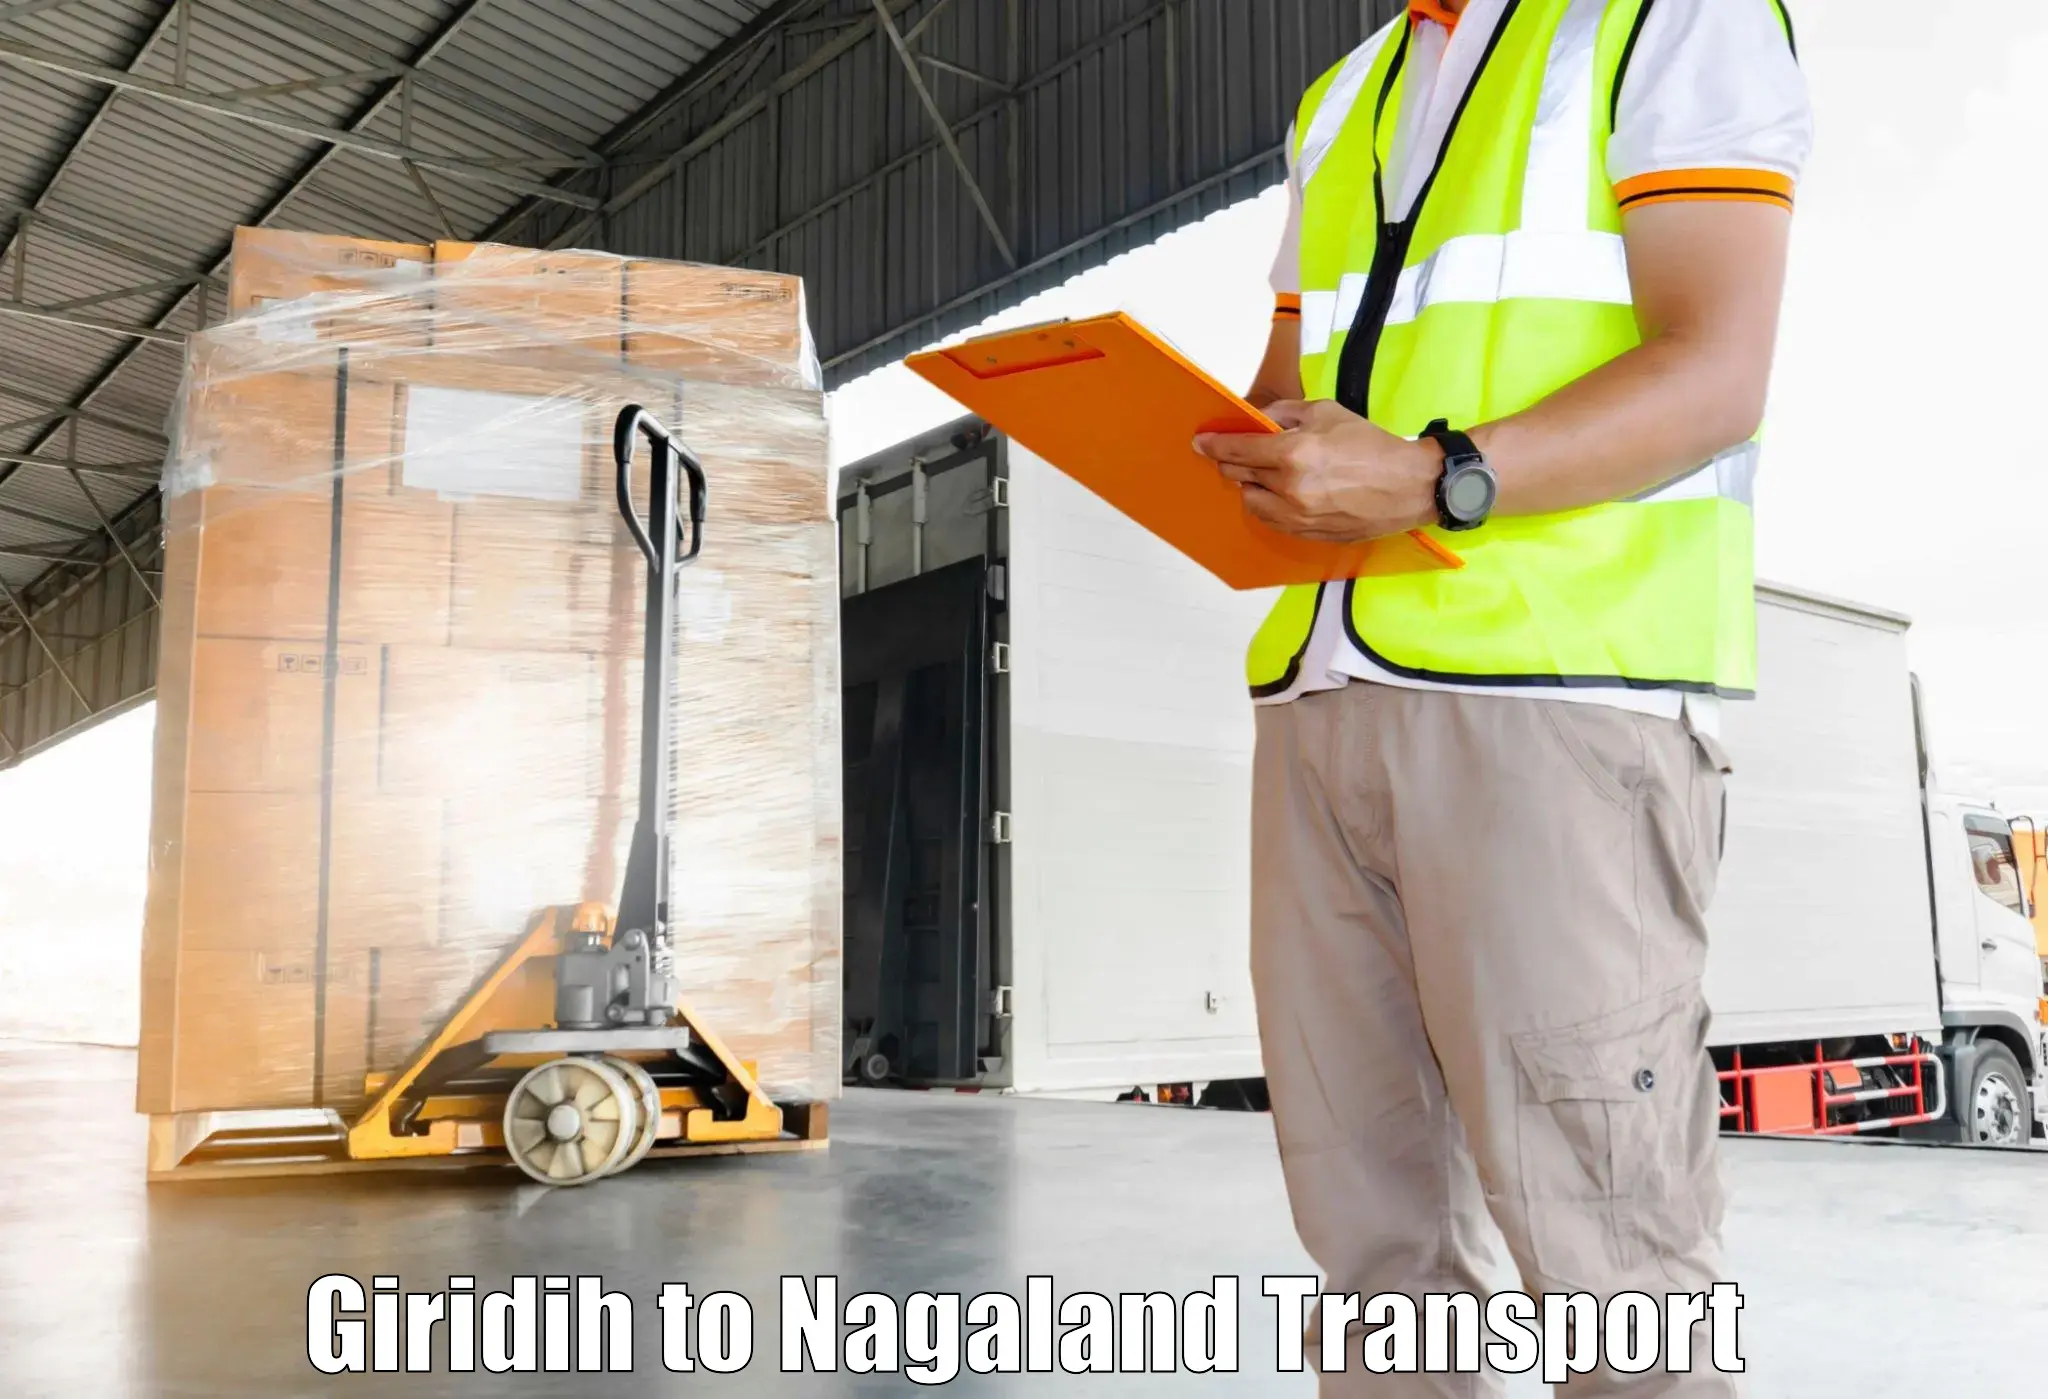 Luggage transport services in Giridih to Nagaland